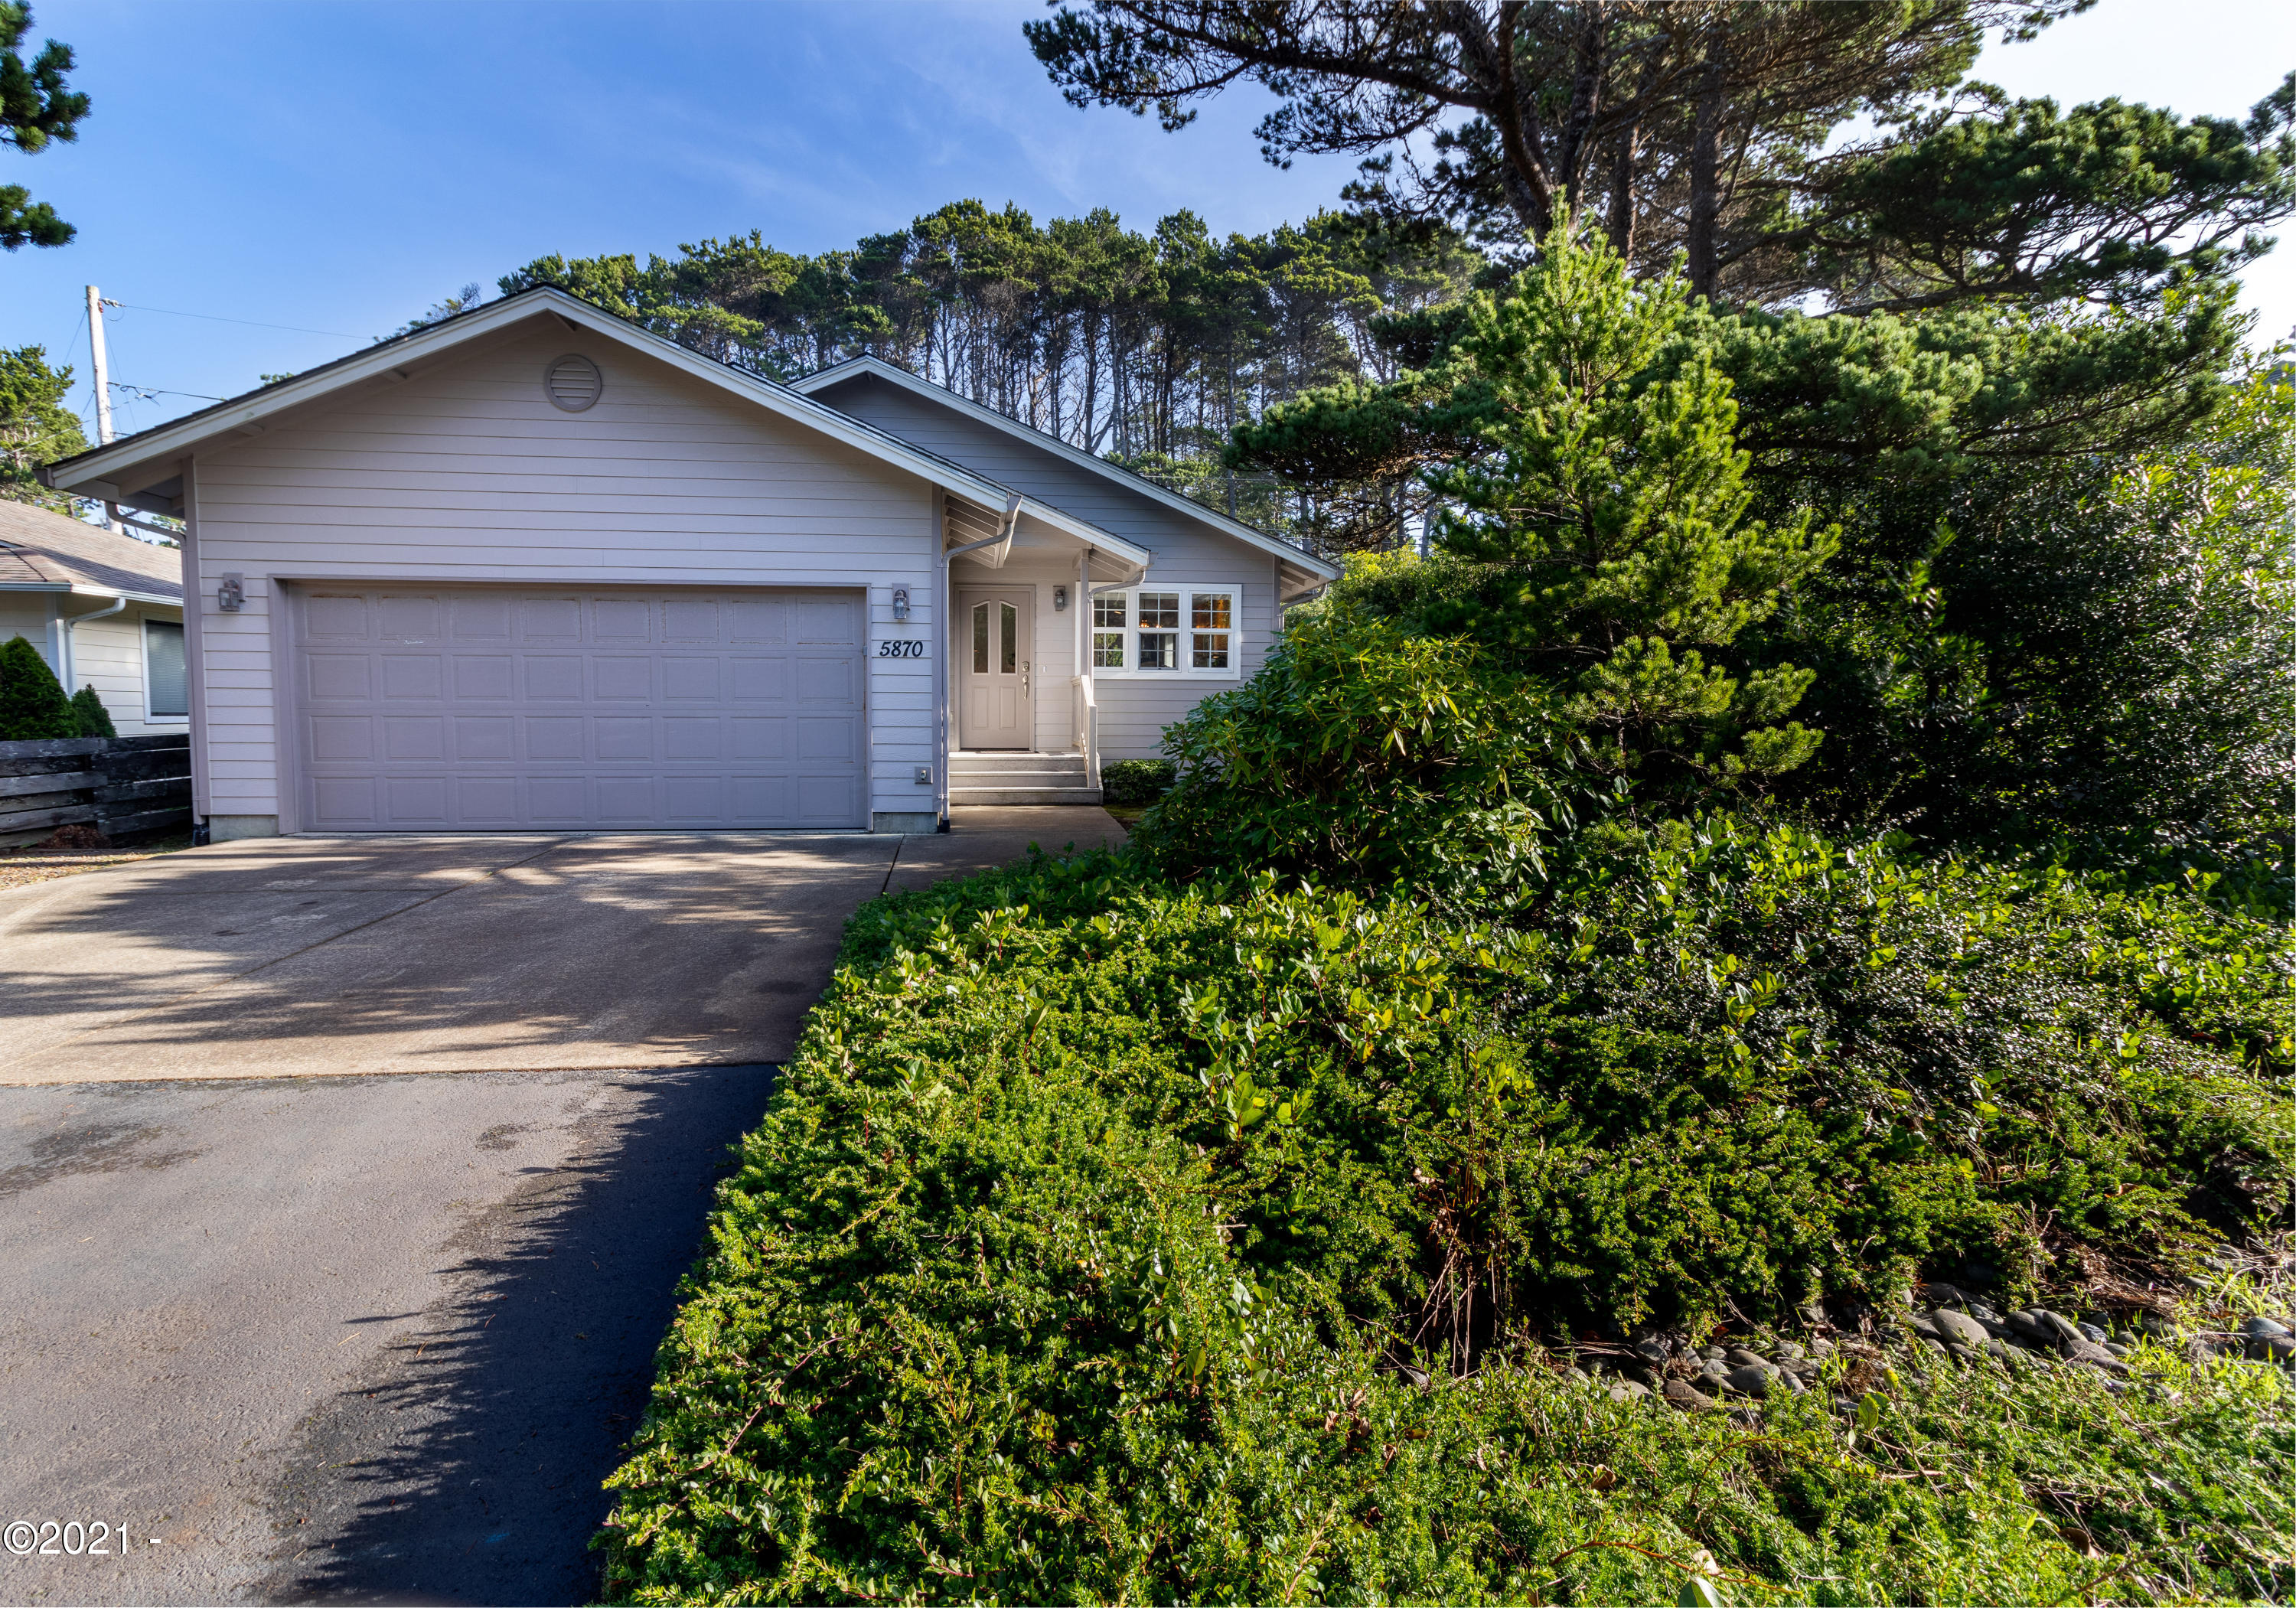 5870 Hacienda Ave Depoe Bay, Gleneden Beach, Lincoln City, Newport, Otis, Rose Lodge, Seal Rock, Waldport, Yachats, To Home Listings - Amy Plechaty, Emerald Coast Realty Real Estate, homes for sale, property for sale